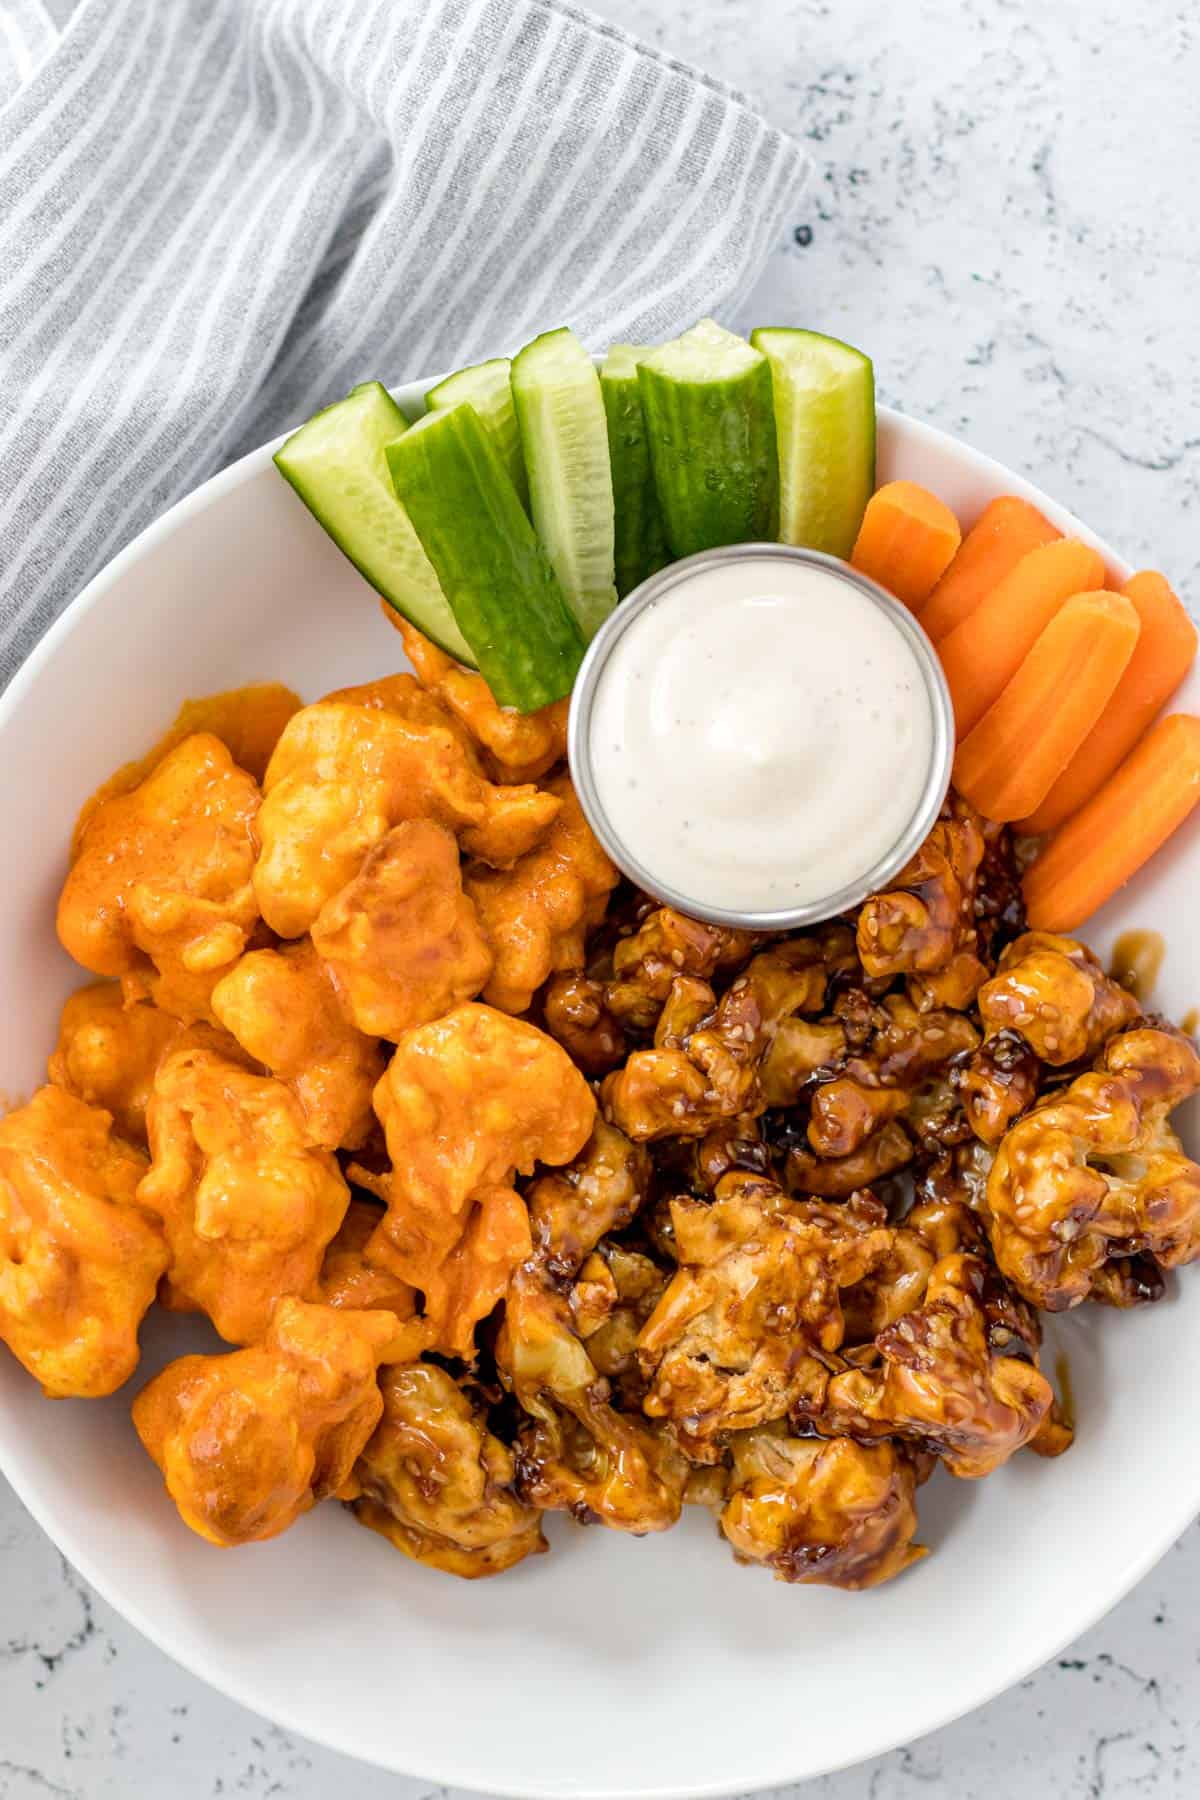 buffalo cauliflower wings and teriyaki cauliflower wings in a bowl served with a side of veggies and ranch dressing for dipping